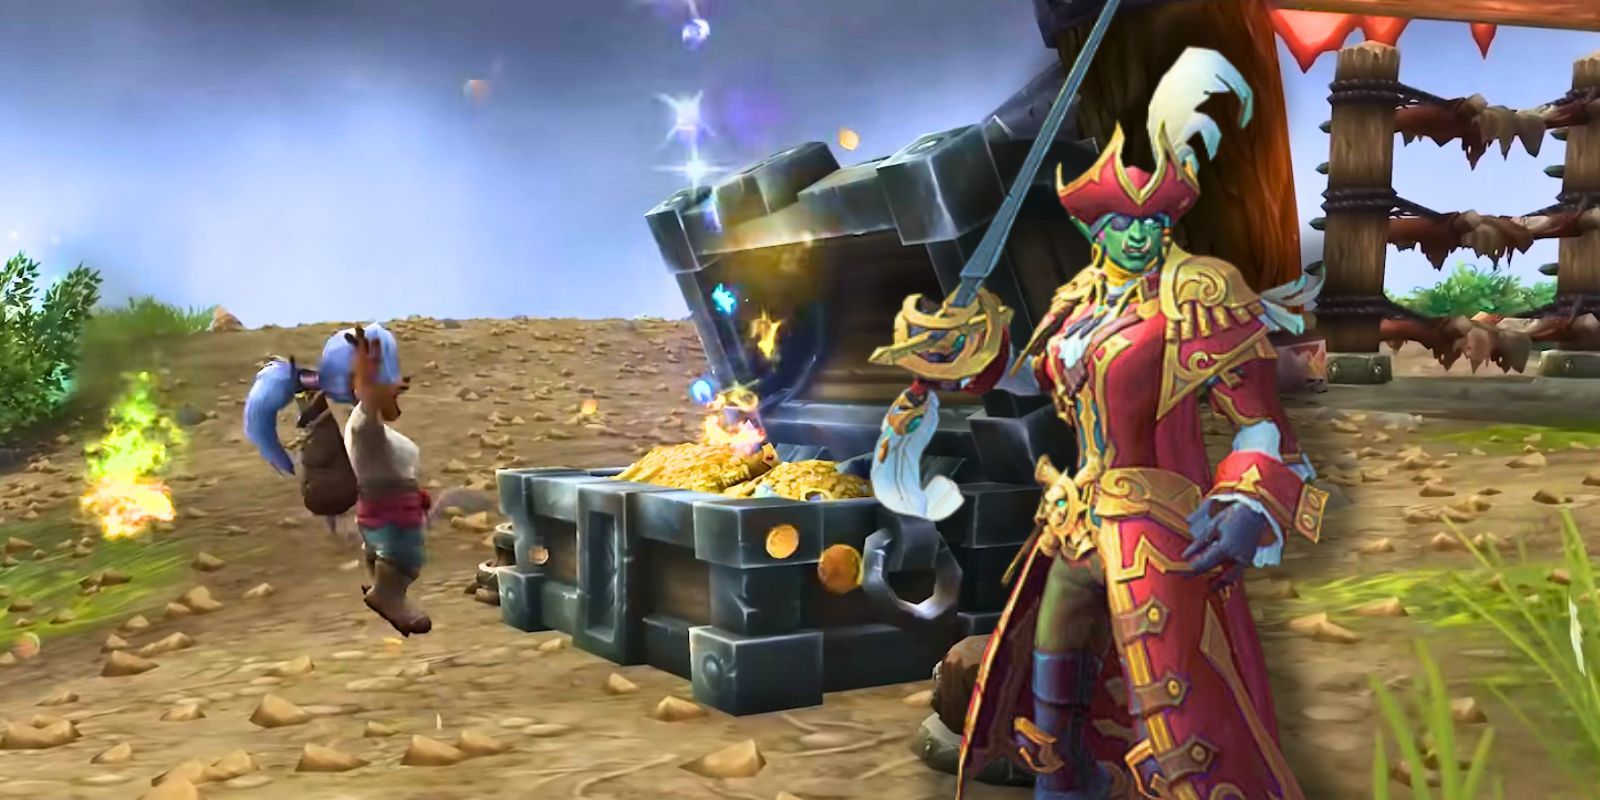 World of Warcraft Plunderstorm Update gnome opening a treasure chest while a pirate orc stands nearby